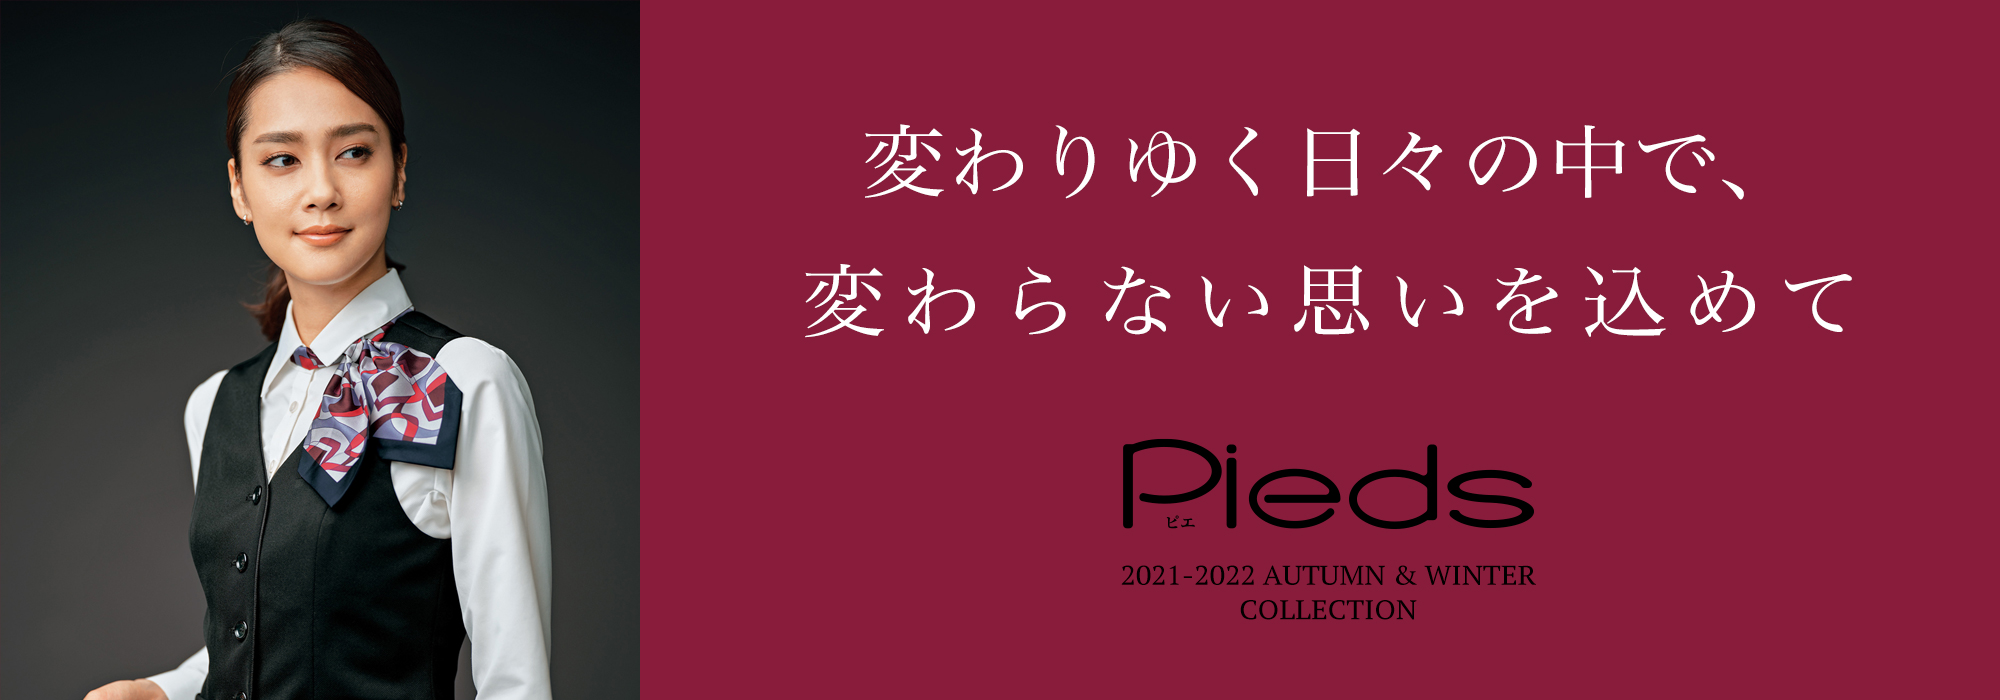 Pieds 2021-2022 AUTUMN & WINTER COLLECTION